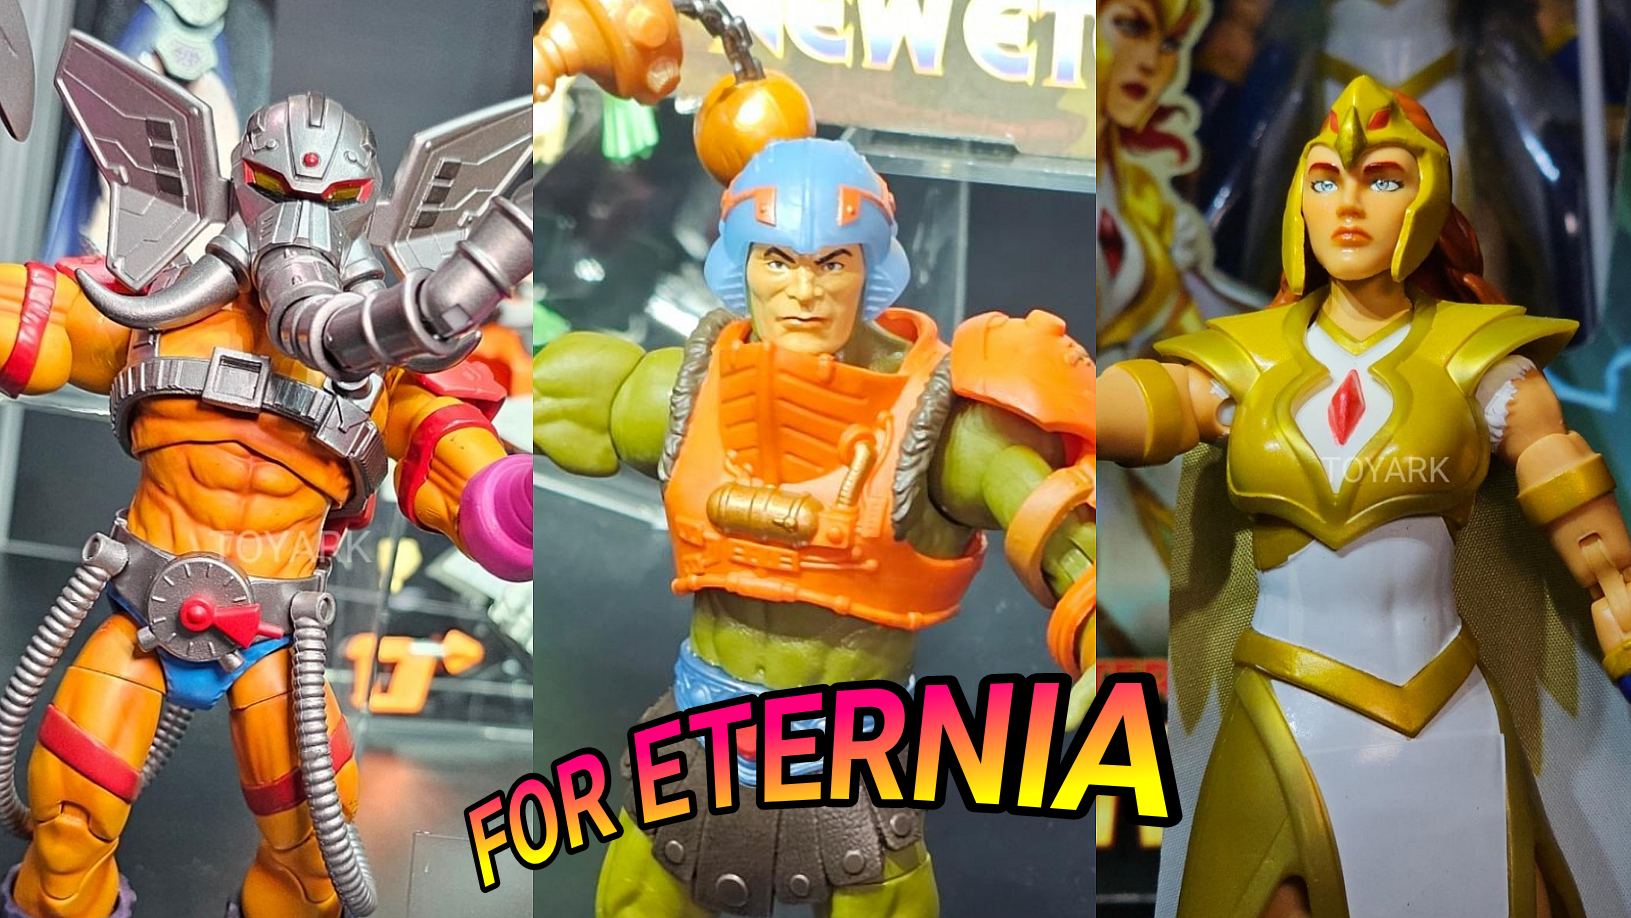 New MASTERVERSE Packaging and Figures spotted at Comic-Con including Movie Evil-Lyn, Snout Spout and More! *Updated*